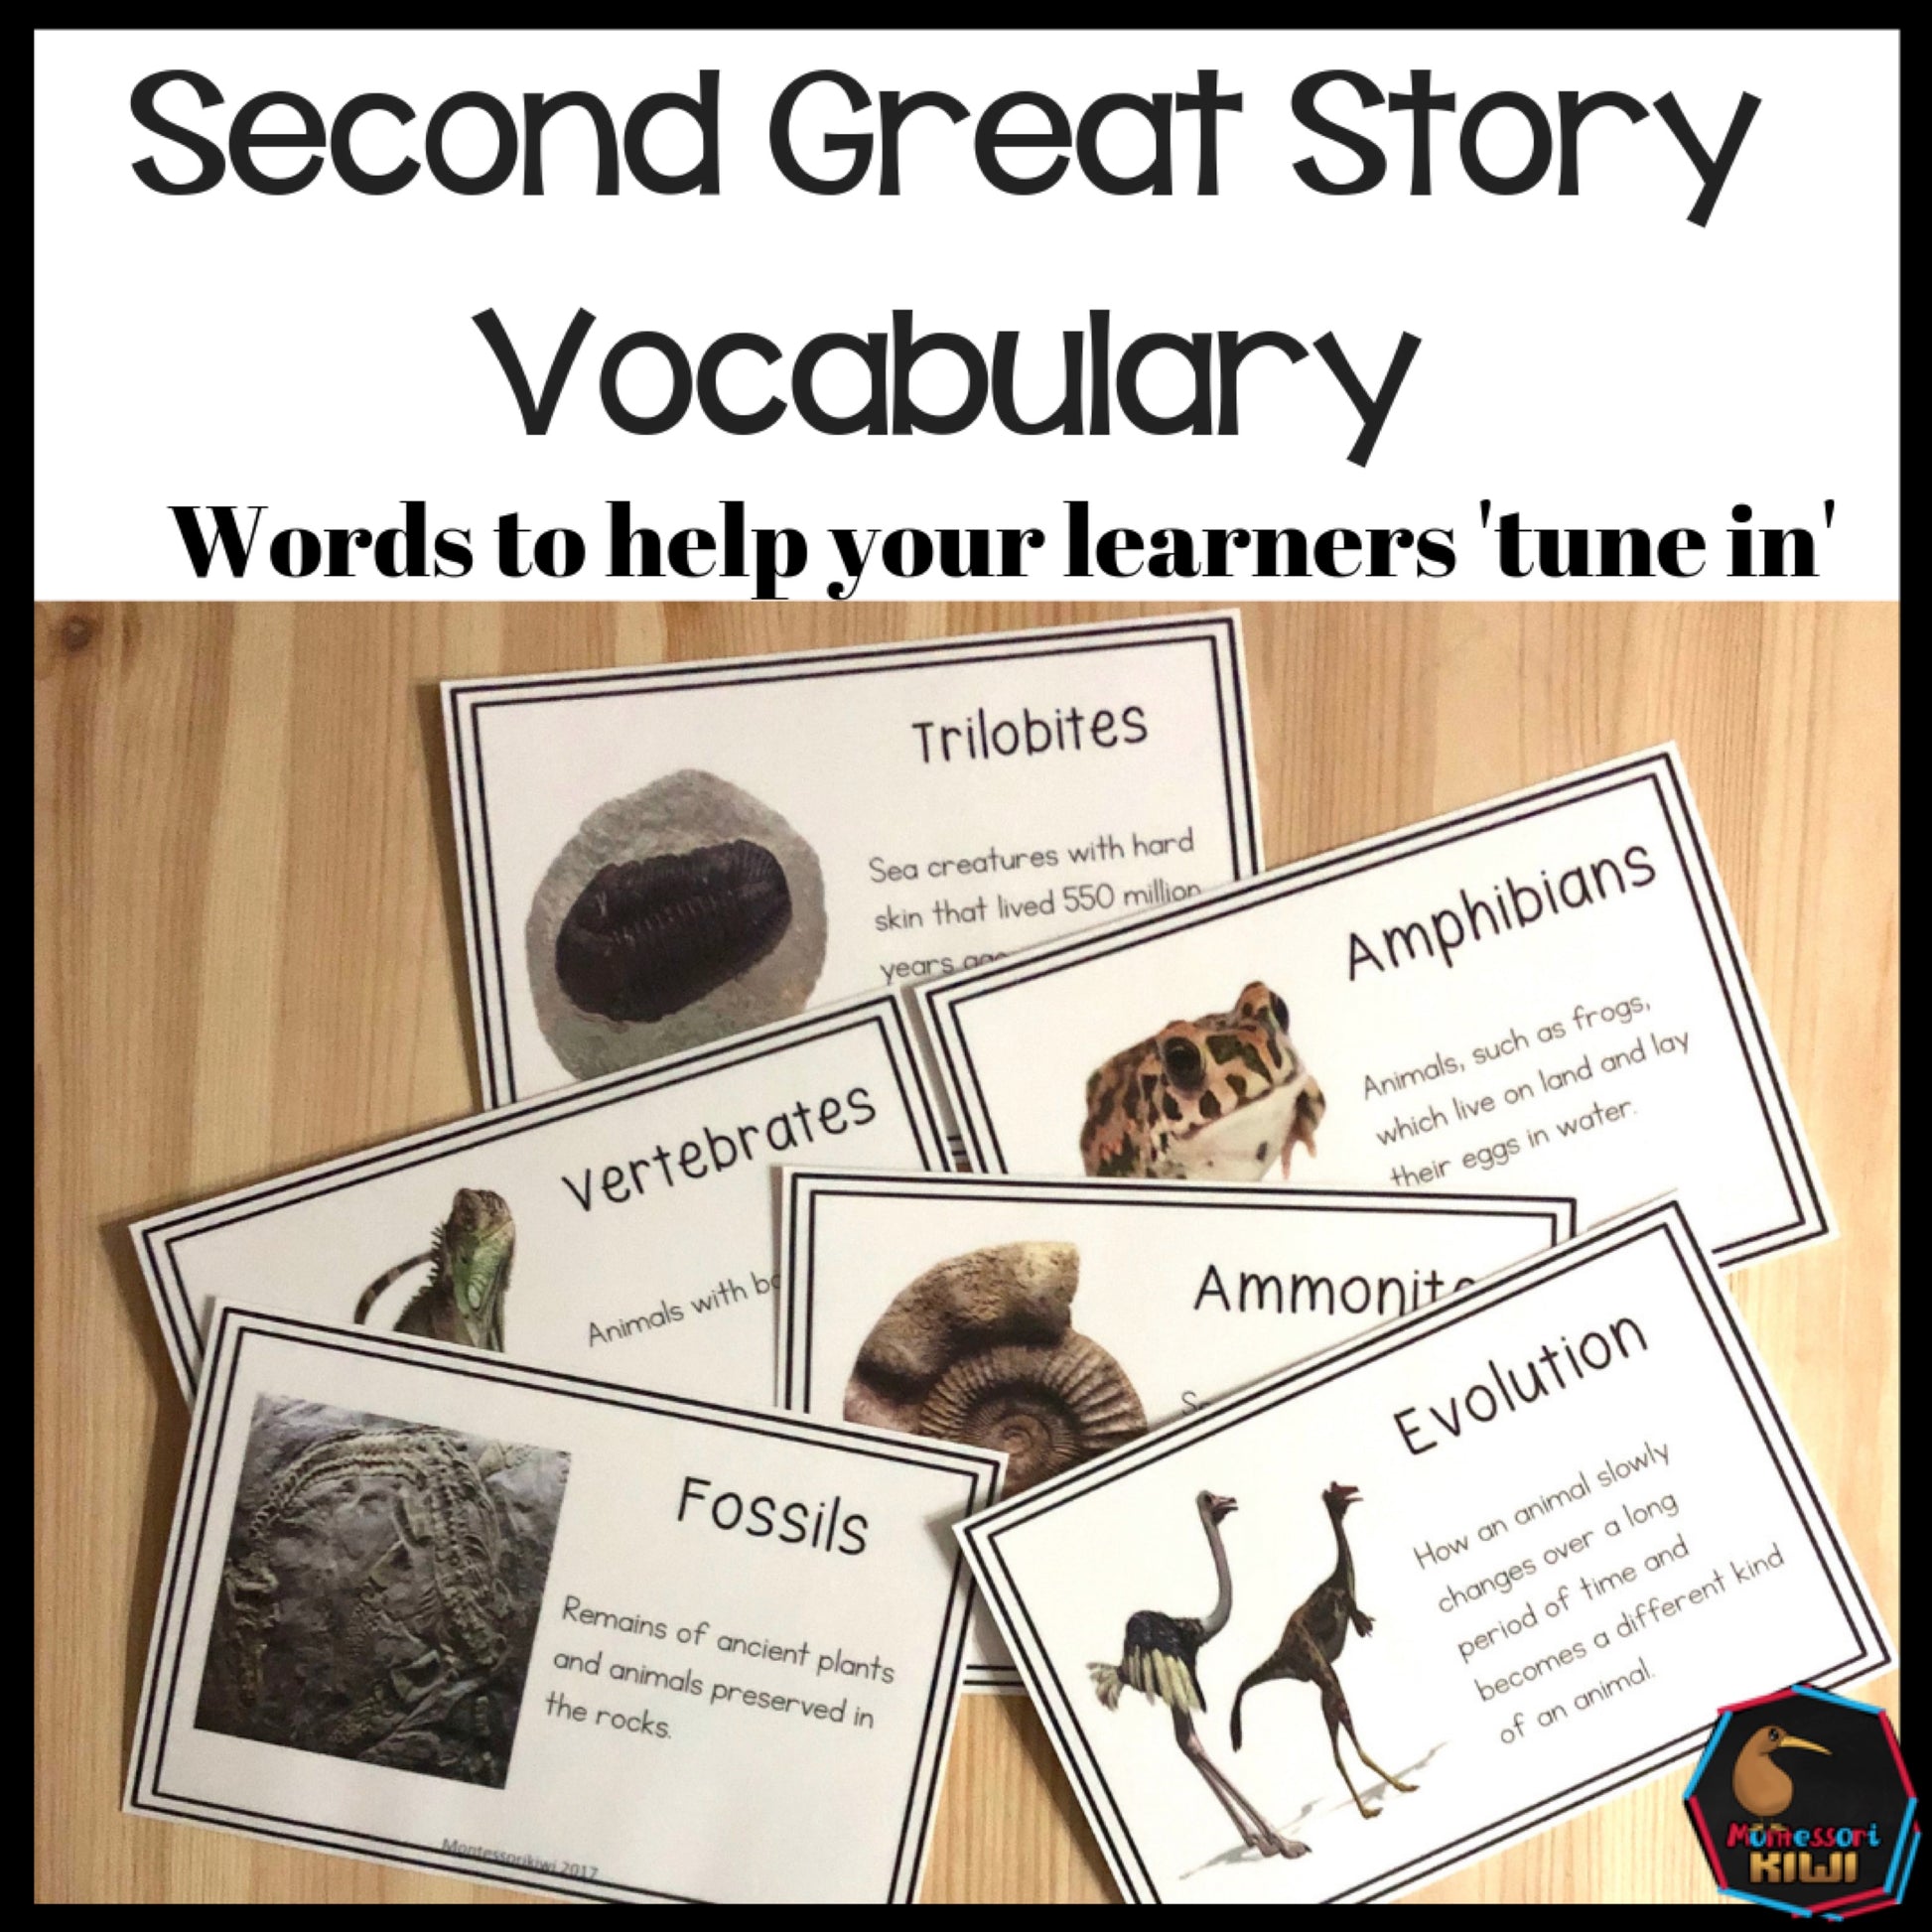 Vocab words for Second Great Story (cosmic) - montessorikiwi